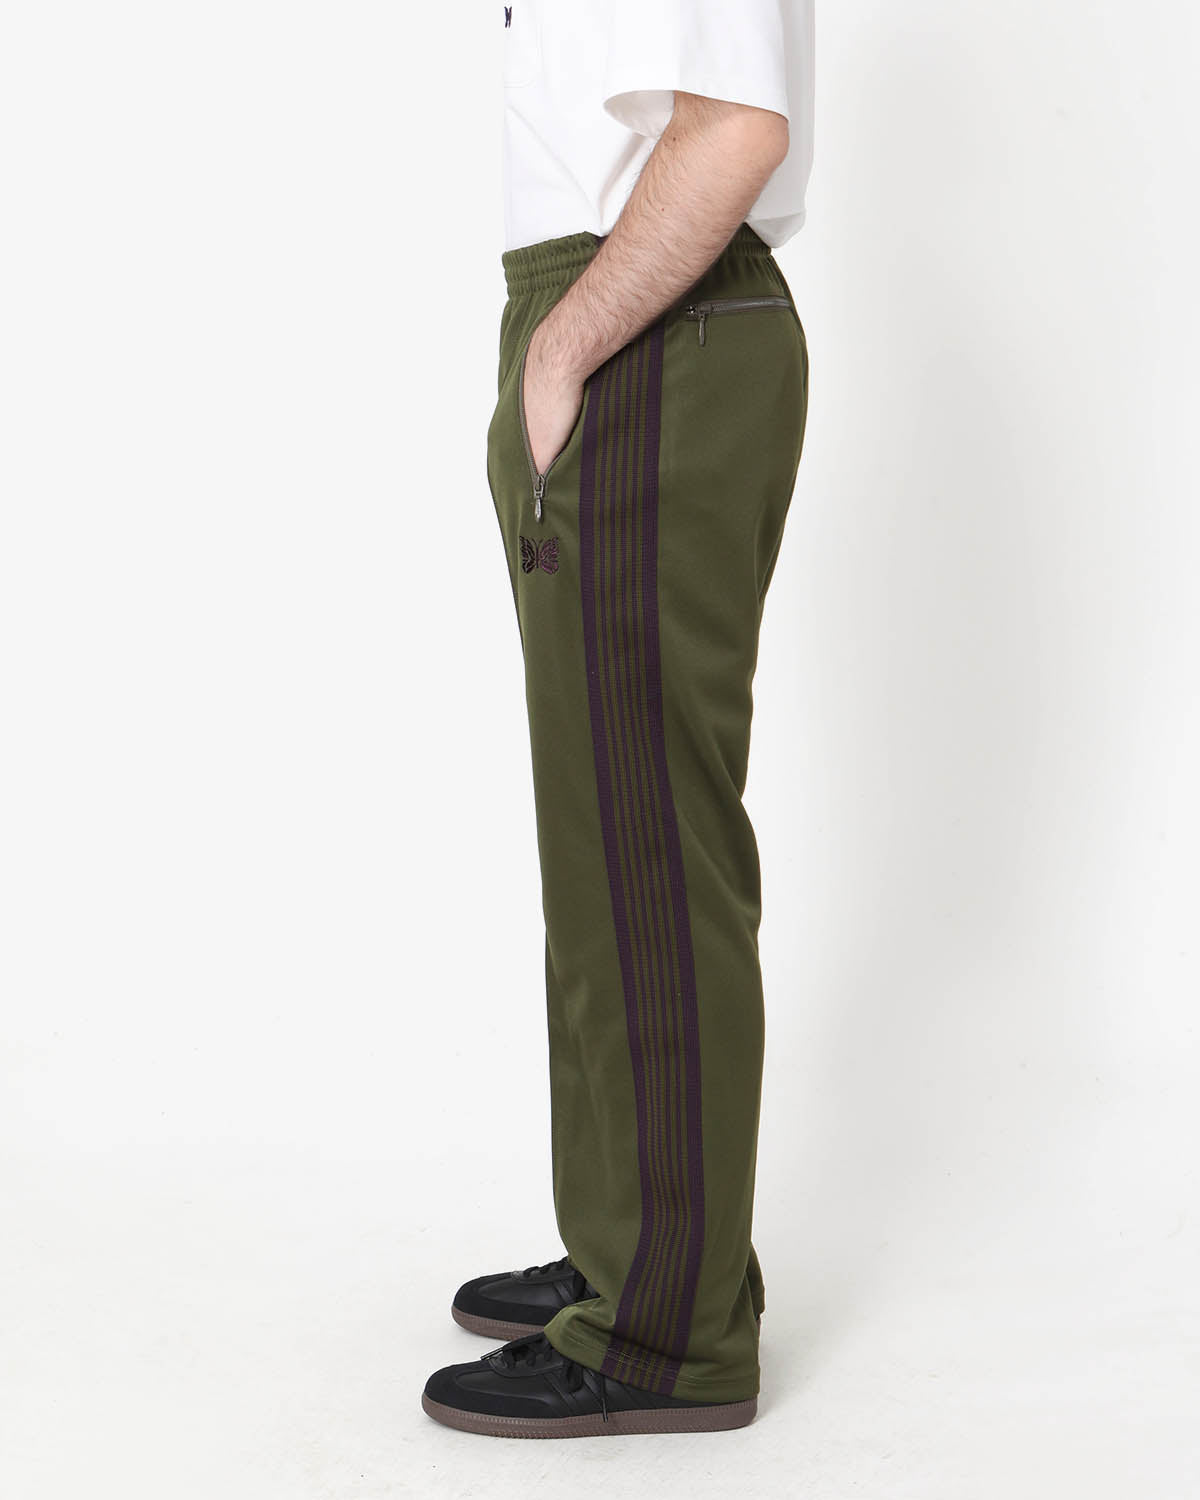 TRACK PANT - POLY SMOOTH